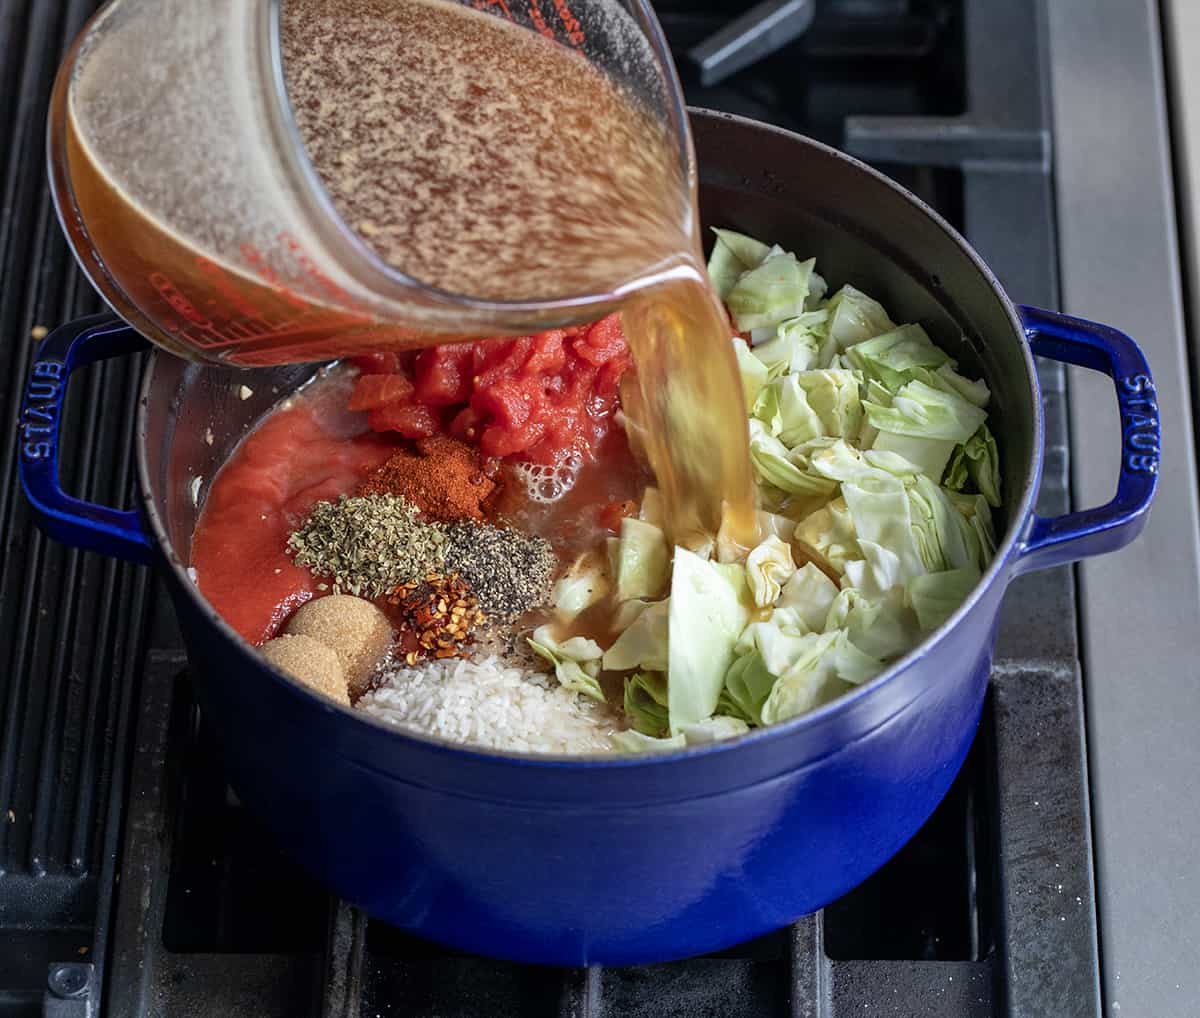 Raw ingredients for Cabbage Roll Soup in a pot over heat.